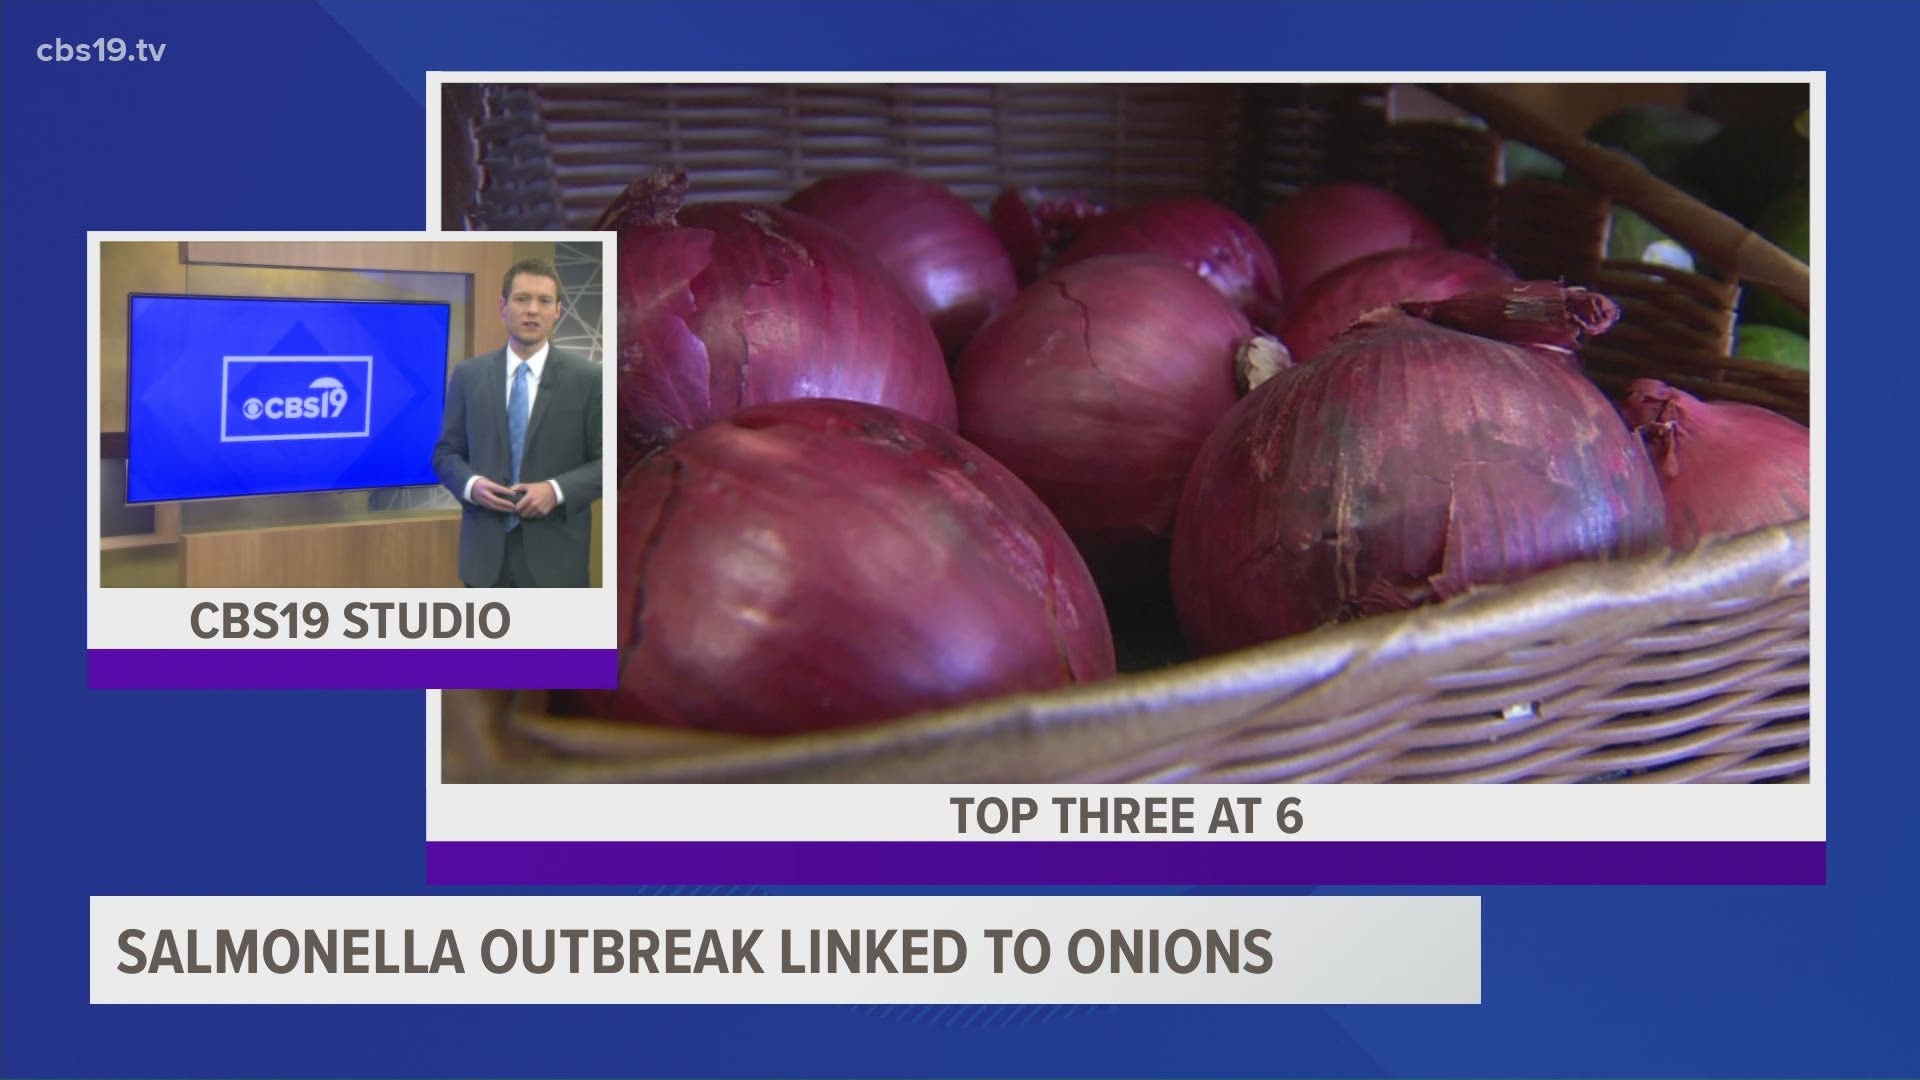 ONION RECALL More than 1,000 people sick with Salmonella Newport due